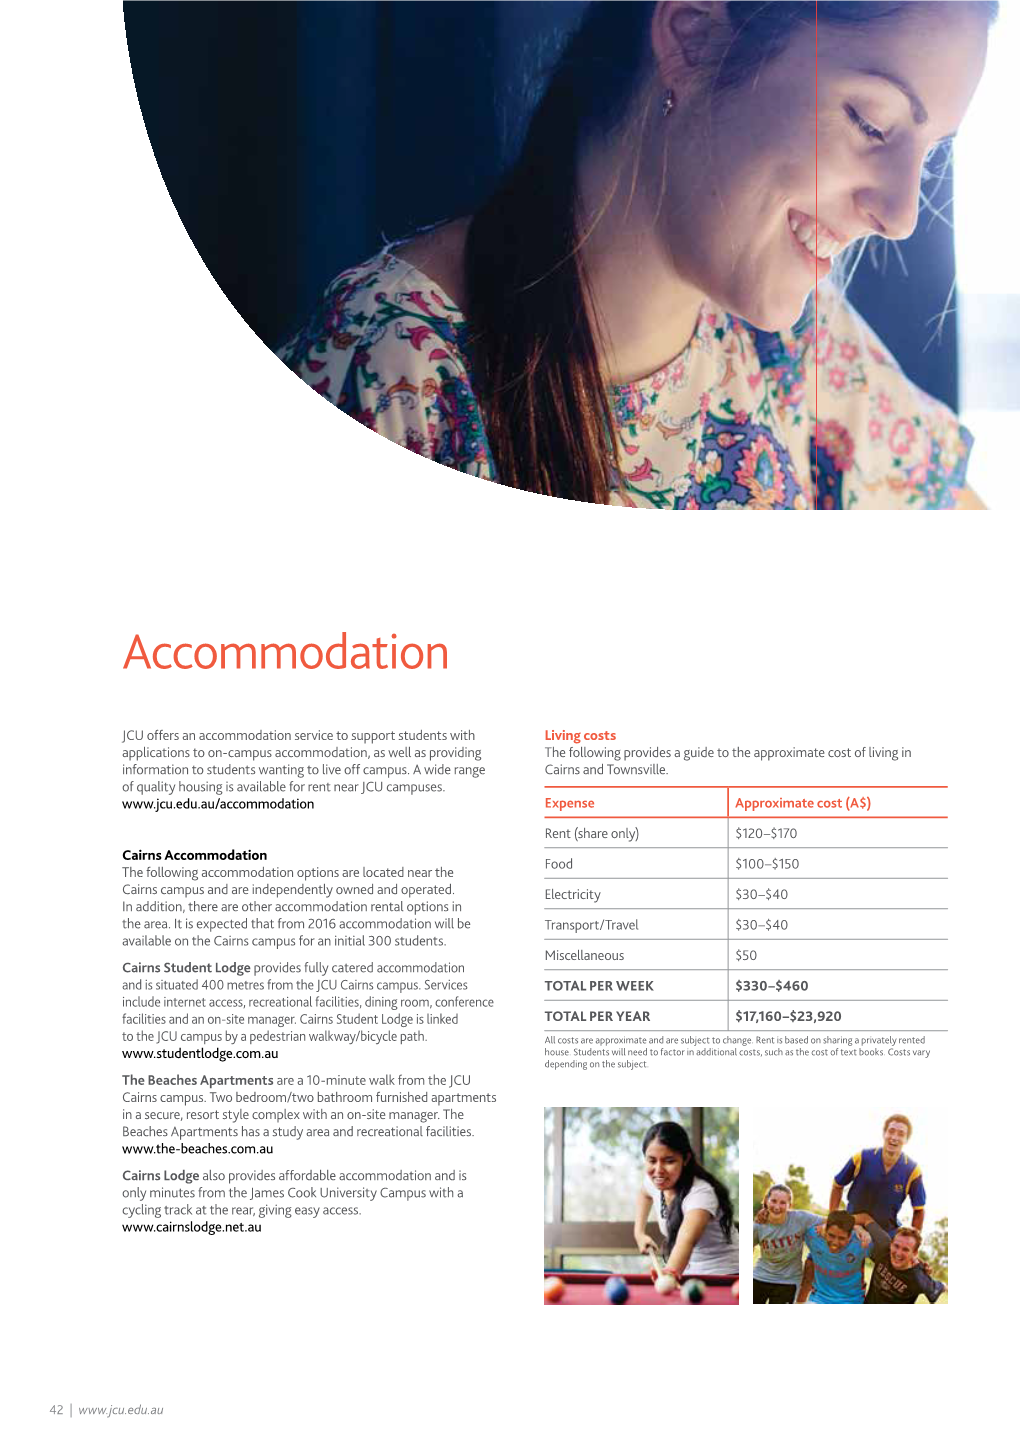 Accommodation Options and Costs